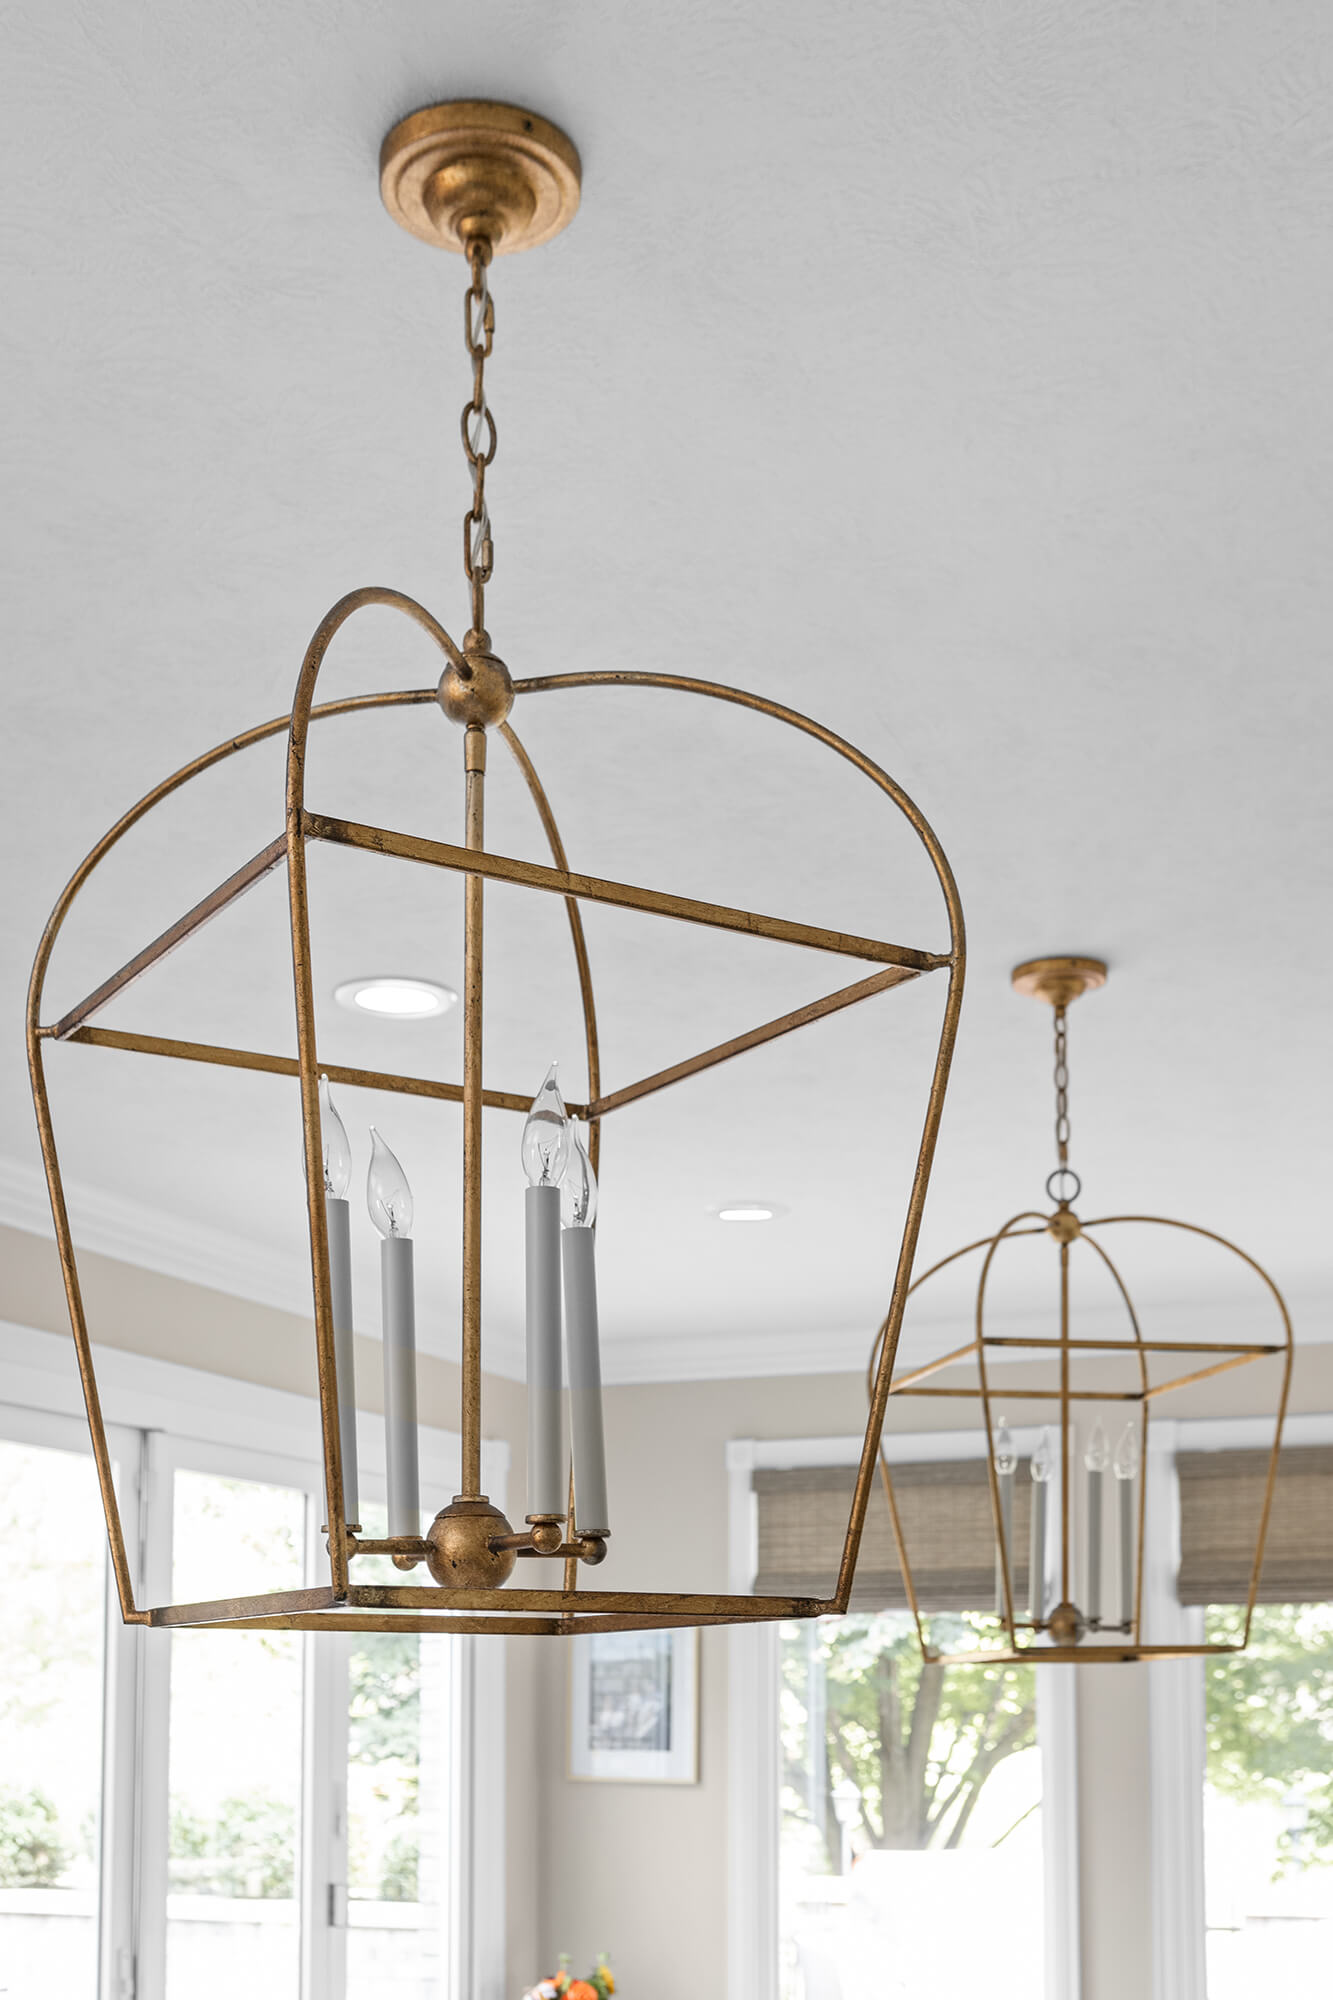 The light fixtures use a brushed brass to accent other colors in the kitchen design.